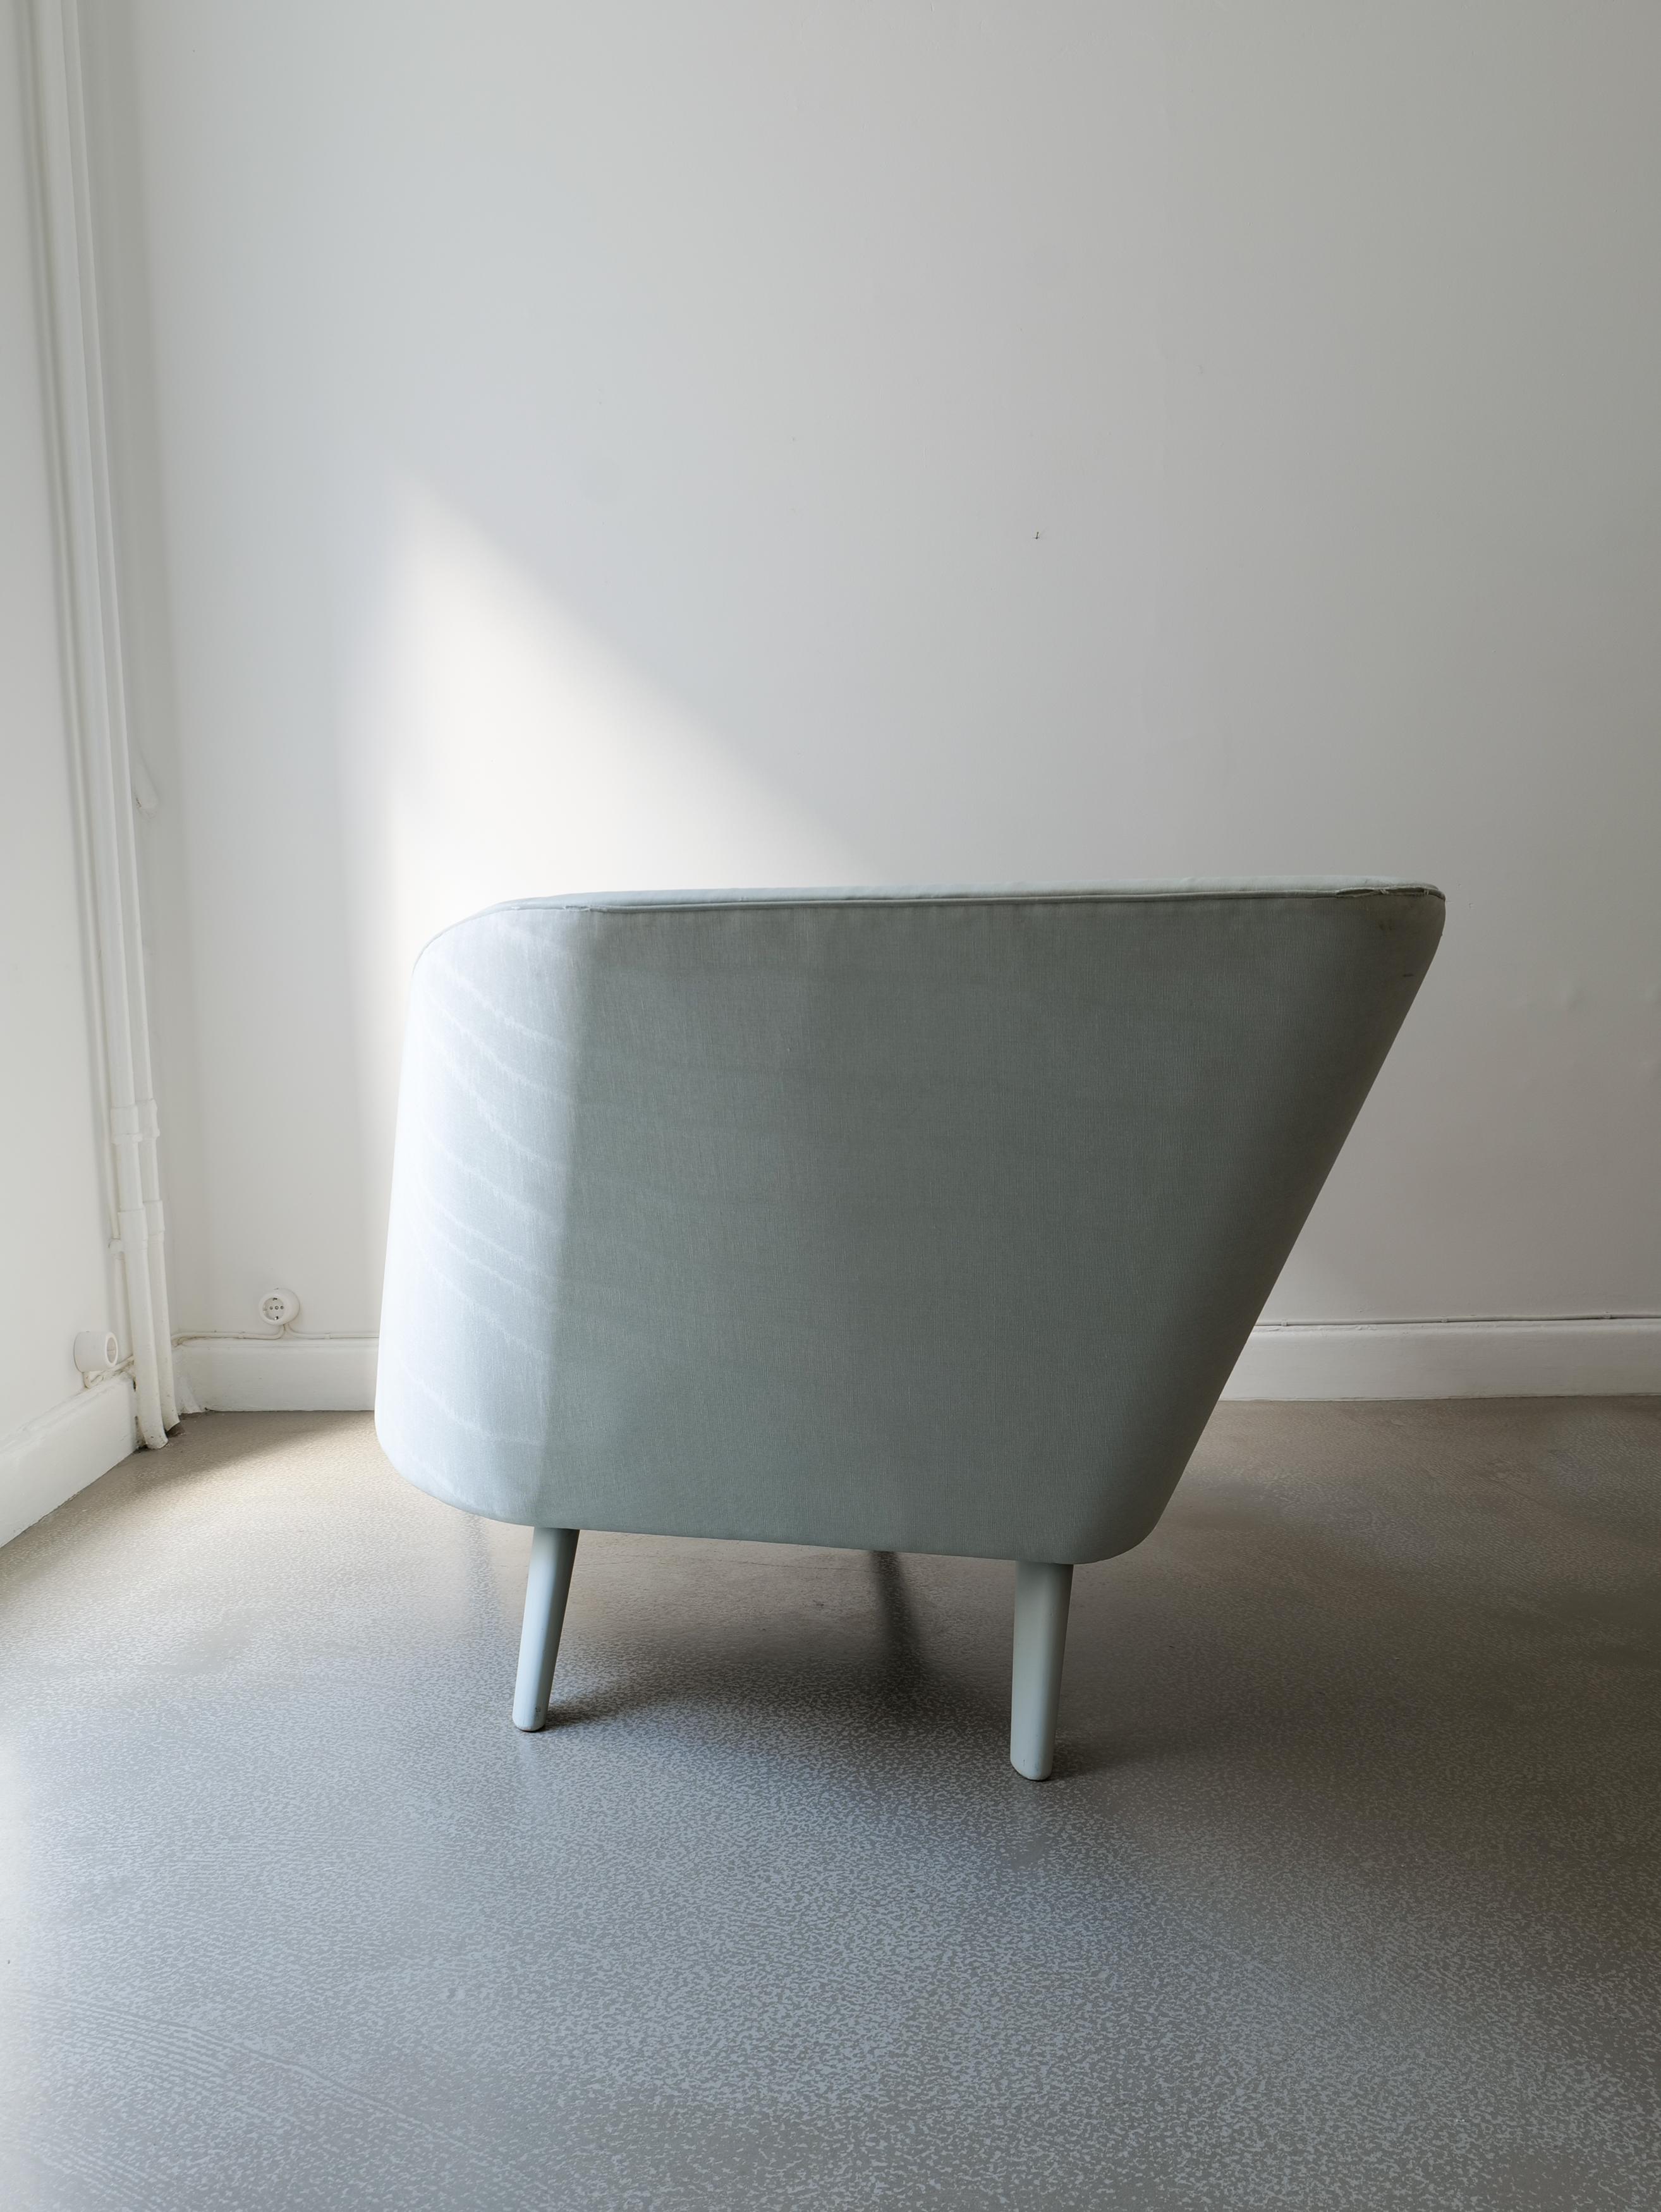 Nya Berlin Acne Studios Chair 2010 In Good Condition For Sale In Stockholm, SE